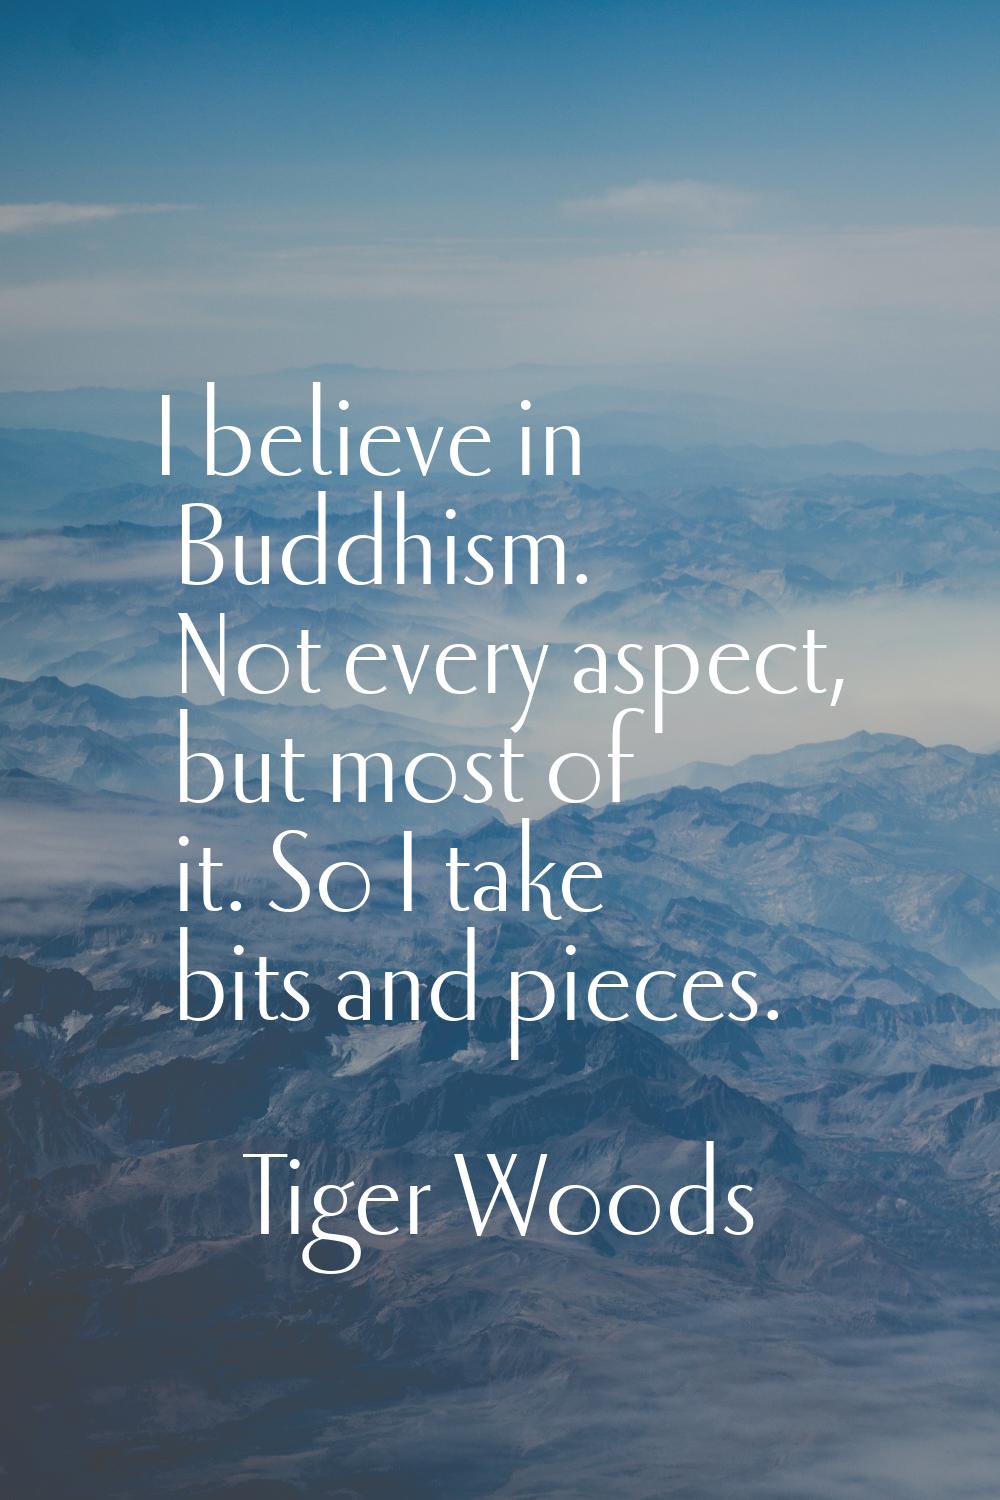 I believe in Buddhism. Not every aspect, but most of it. So I take bits and pieces.